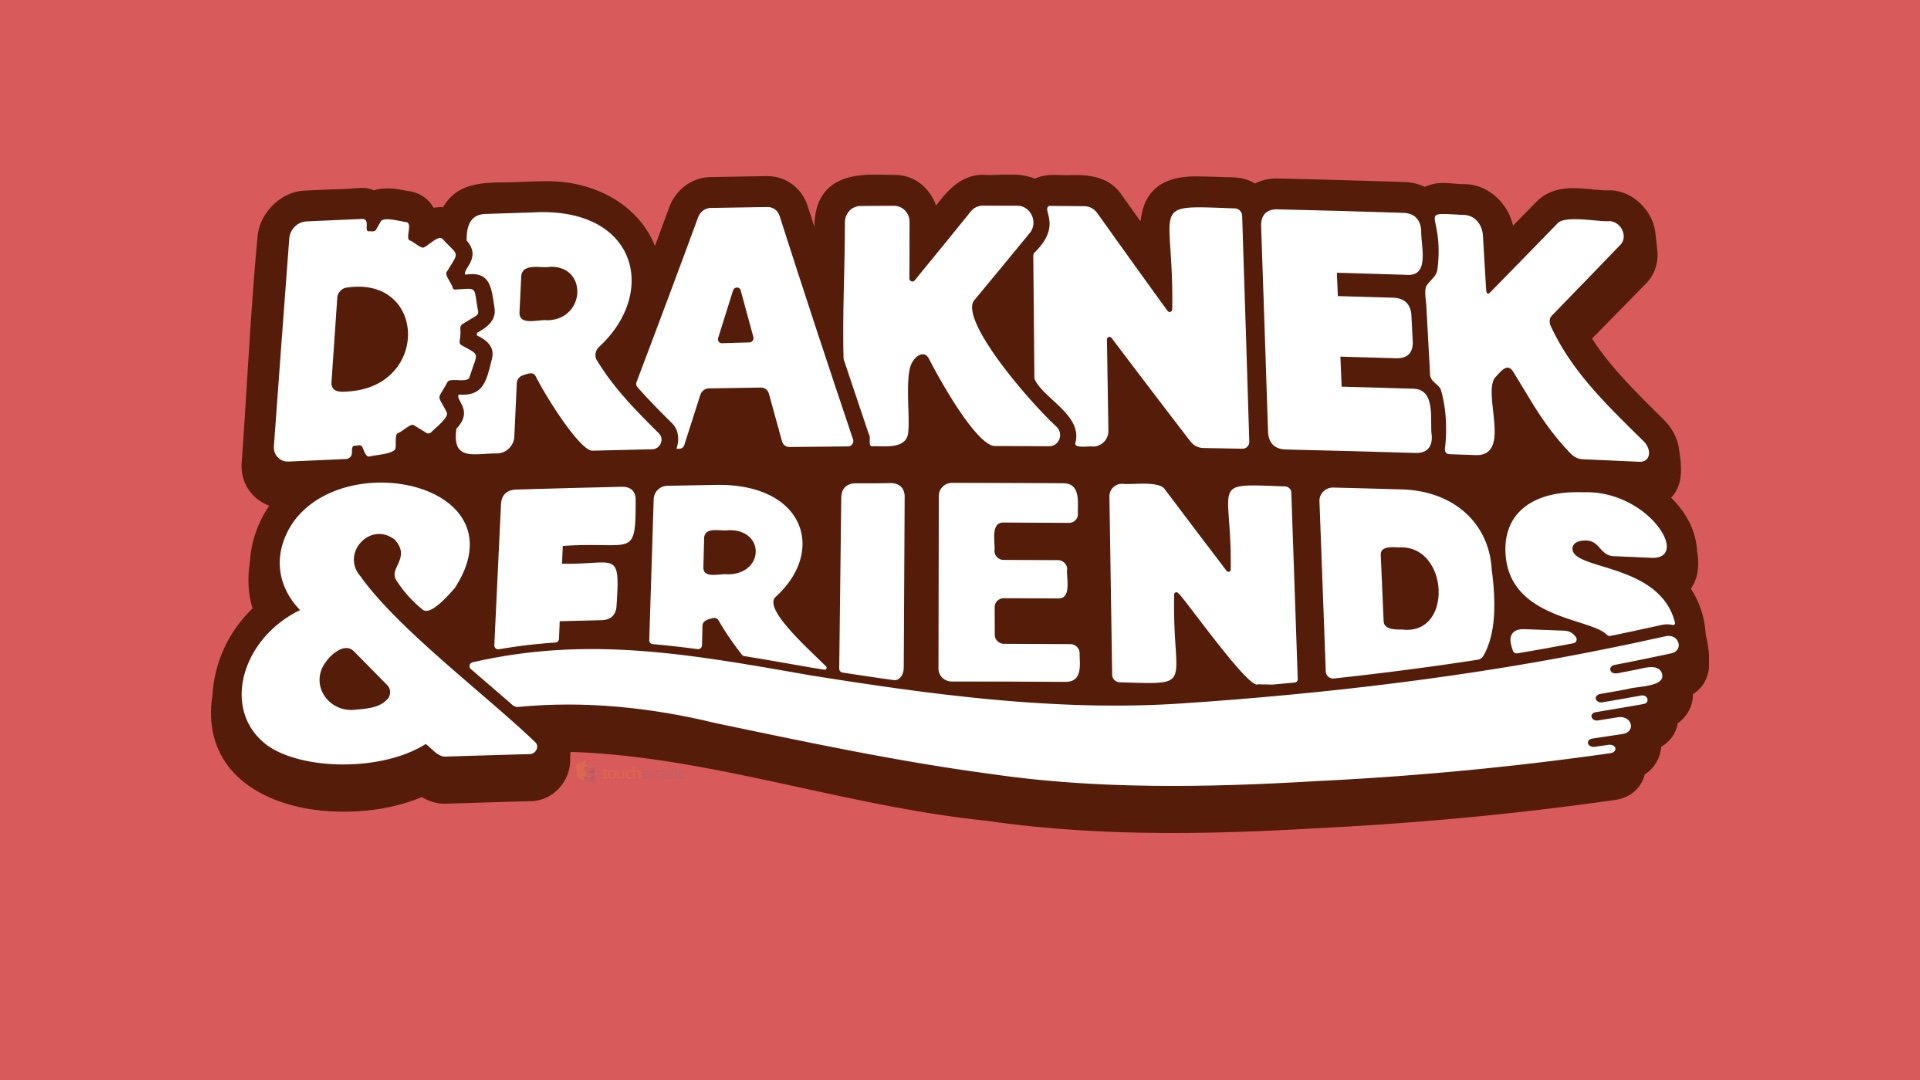 Draknek Interview: Alan Hazelden on Thinky Puzzle Games, A Monster’s Expedition, Working With Apple Arcade, Console Releases, Steam, Mobile Ports, and More